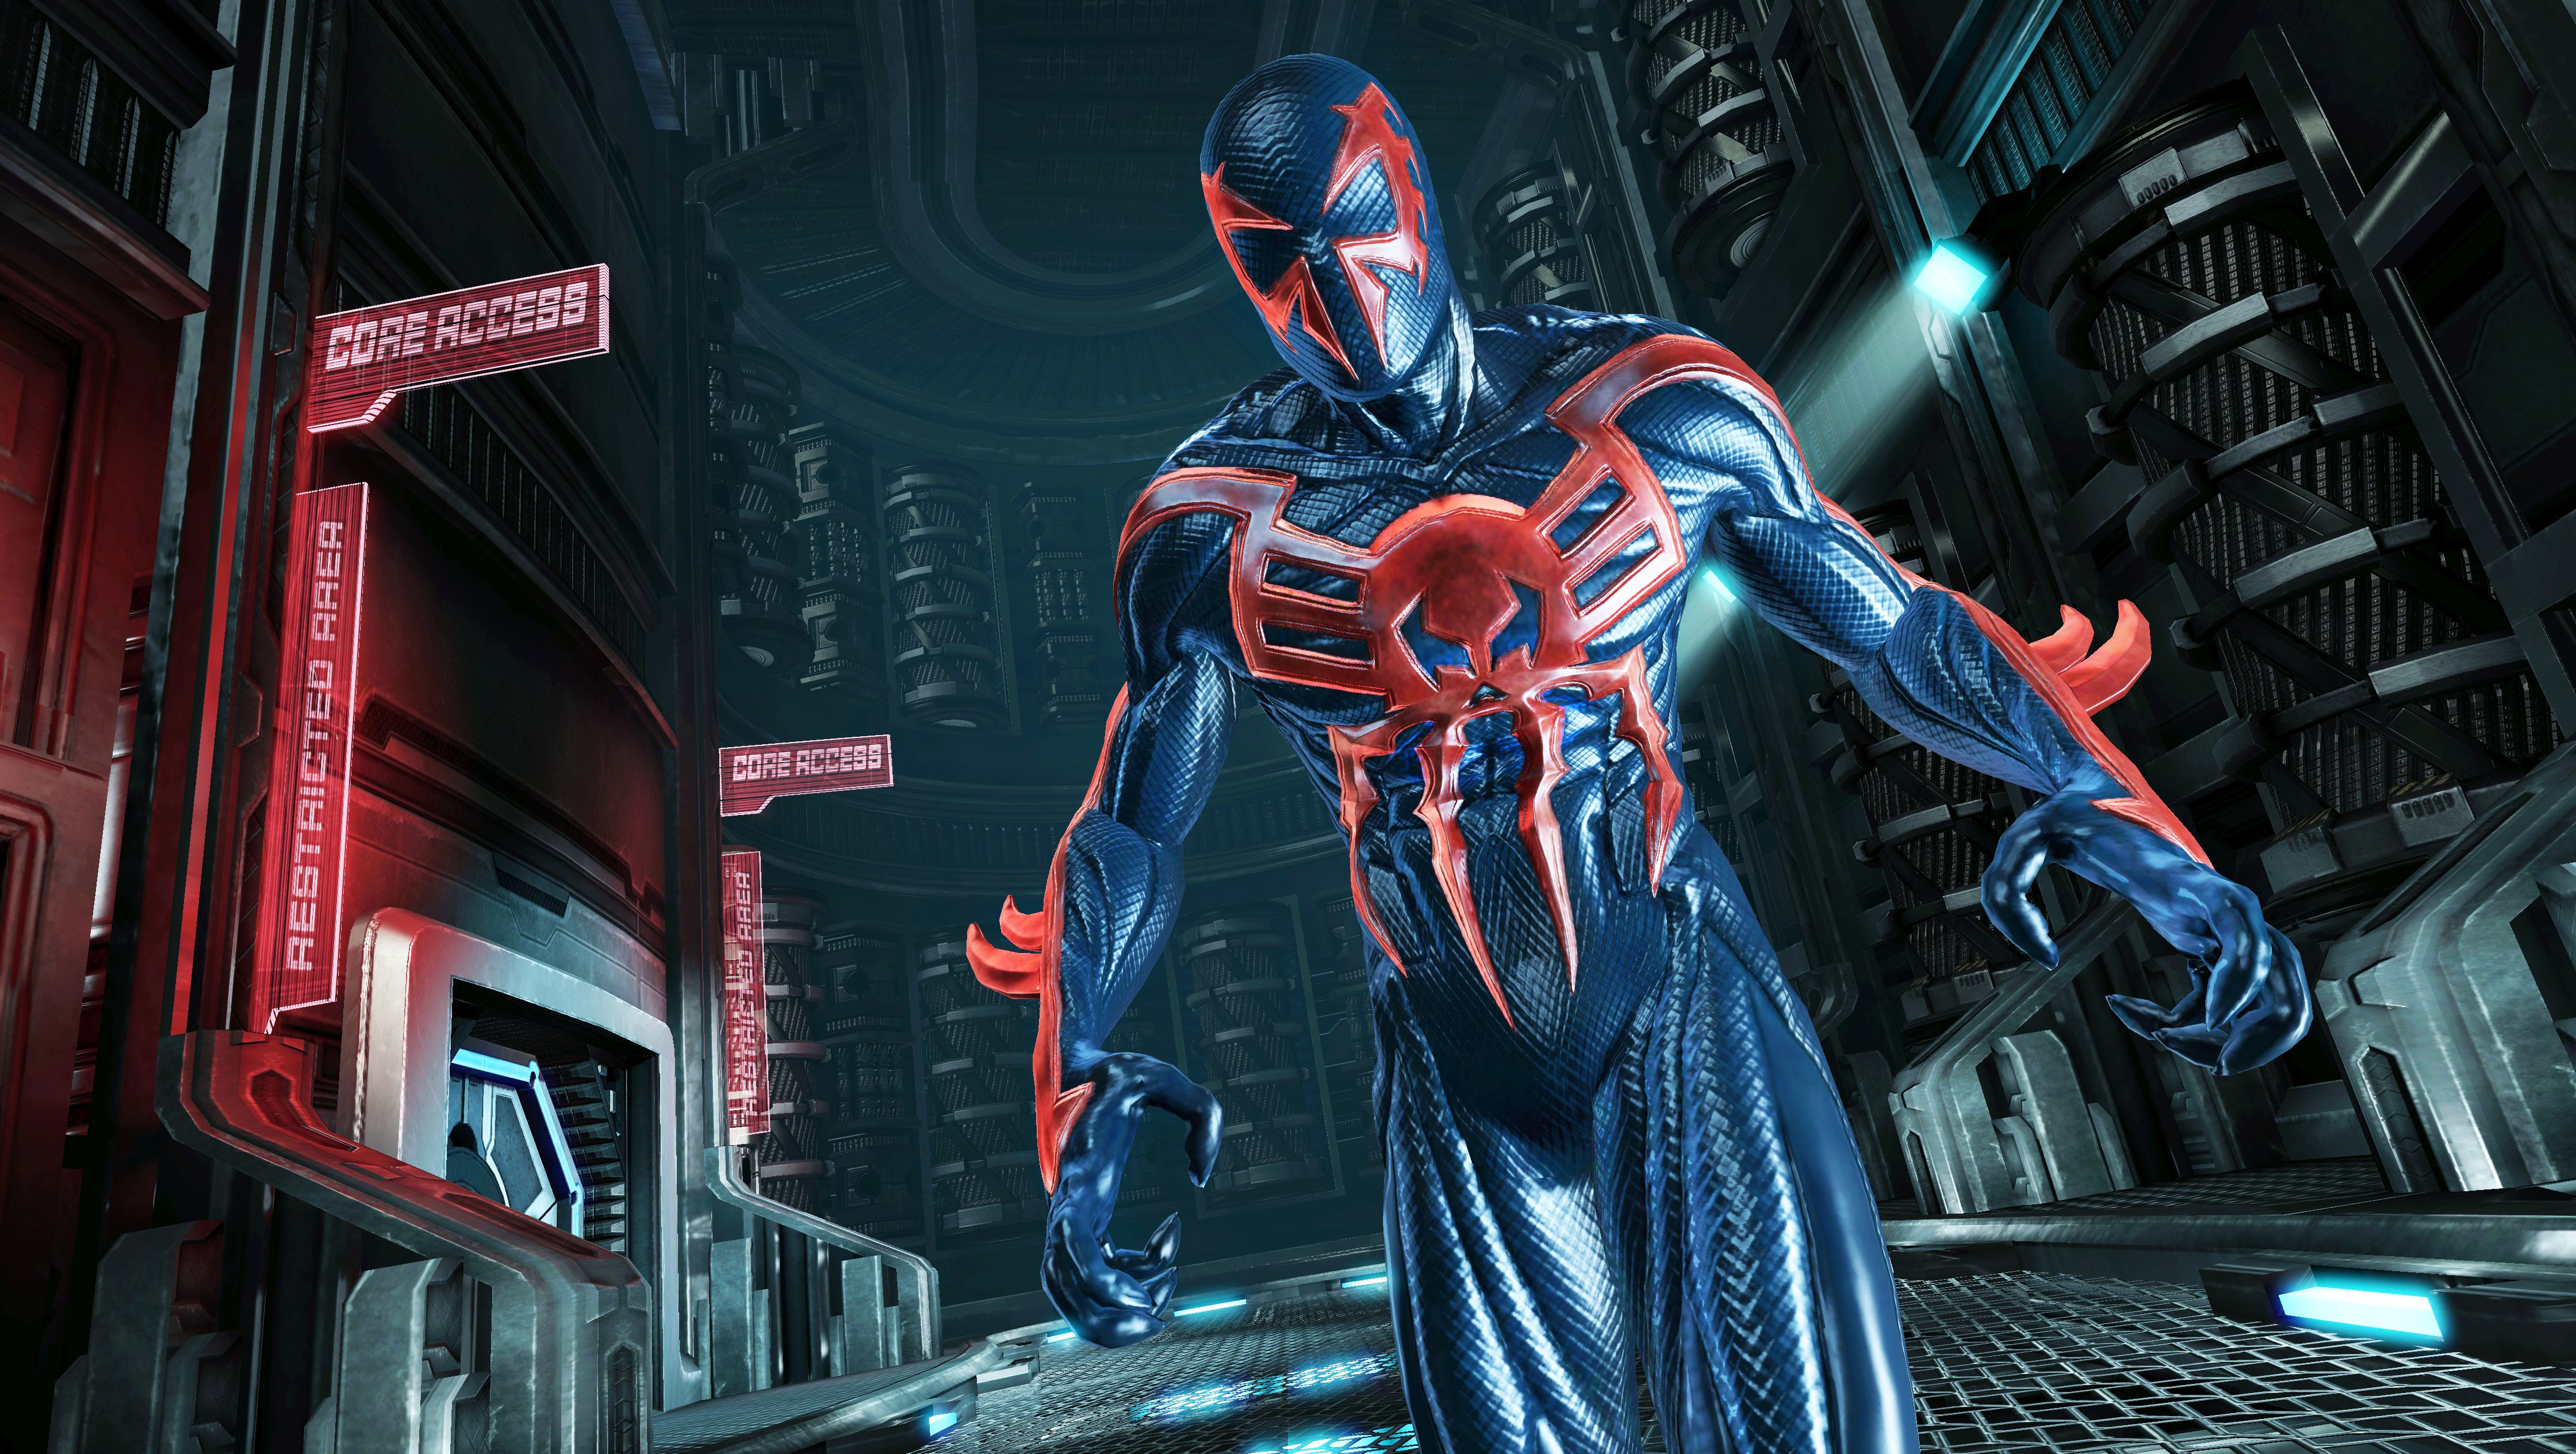 2099 Games